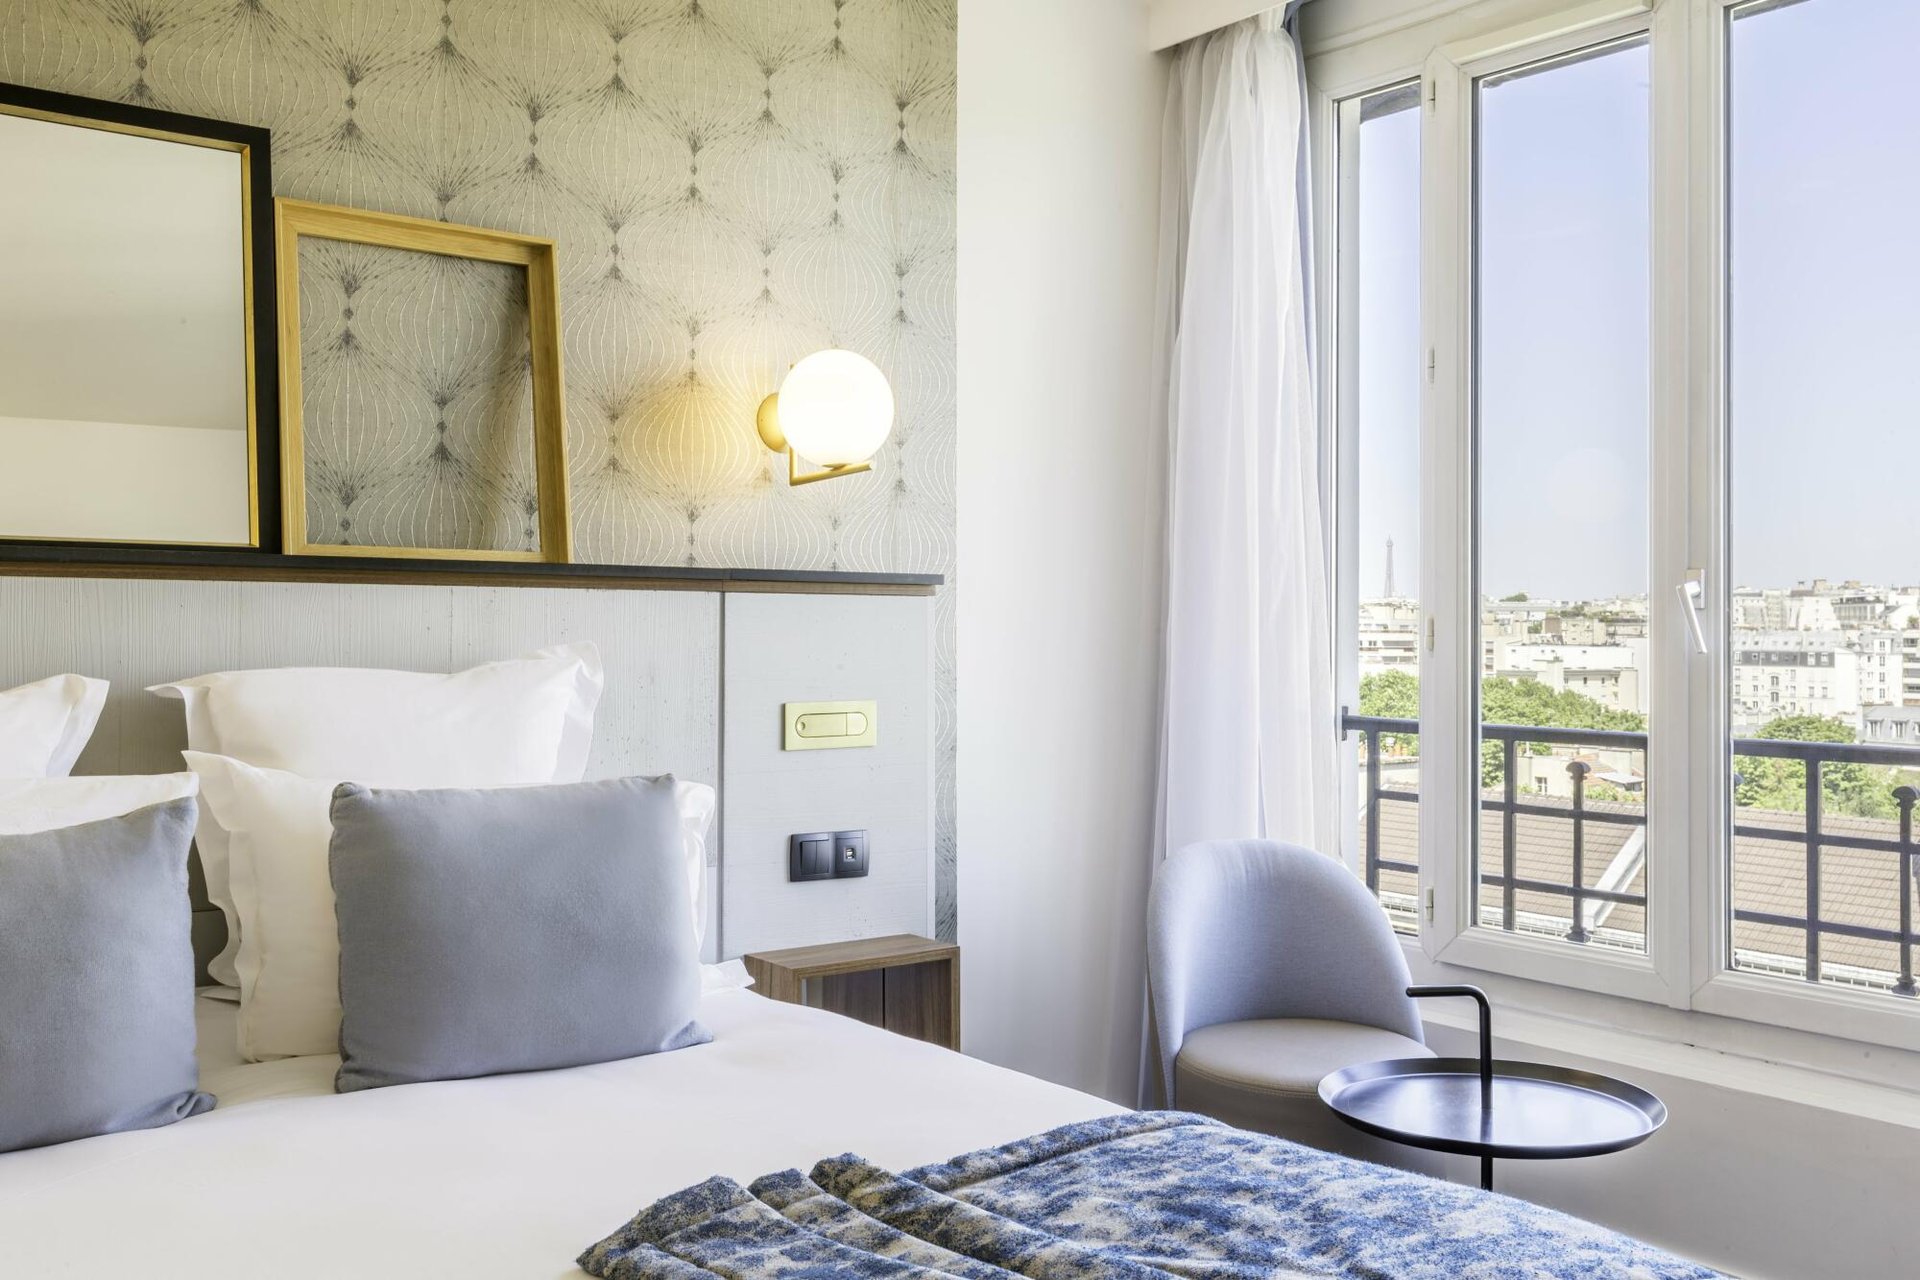 BW Plus La Demeure | Room with Eiffel tower view